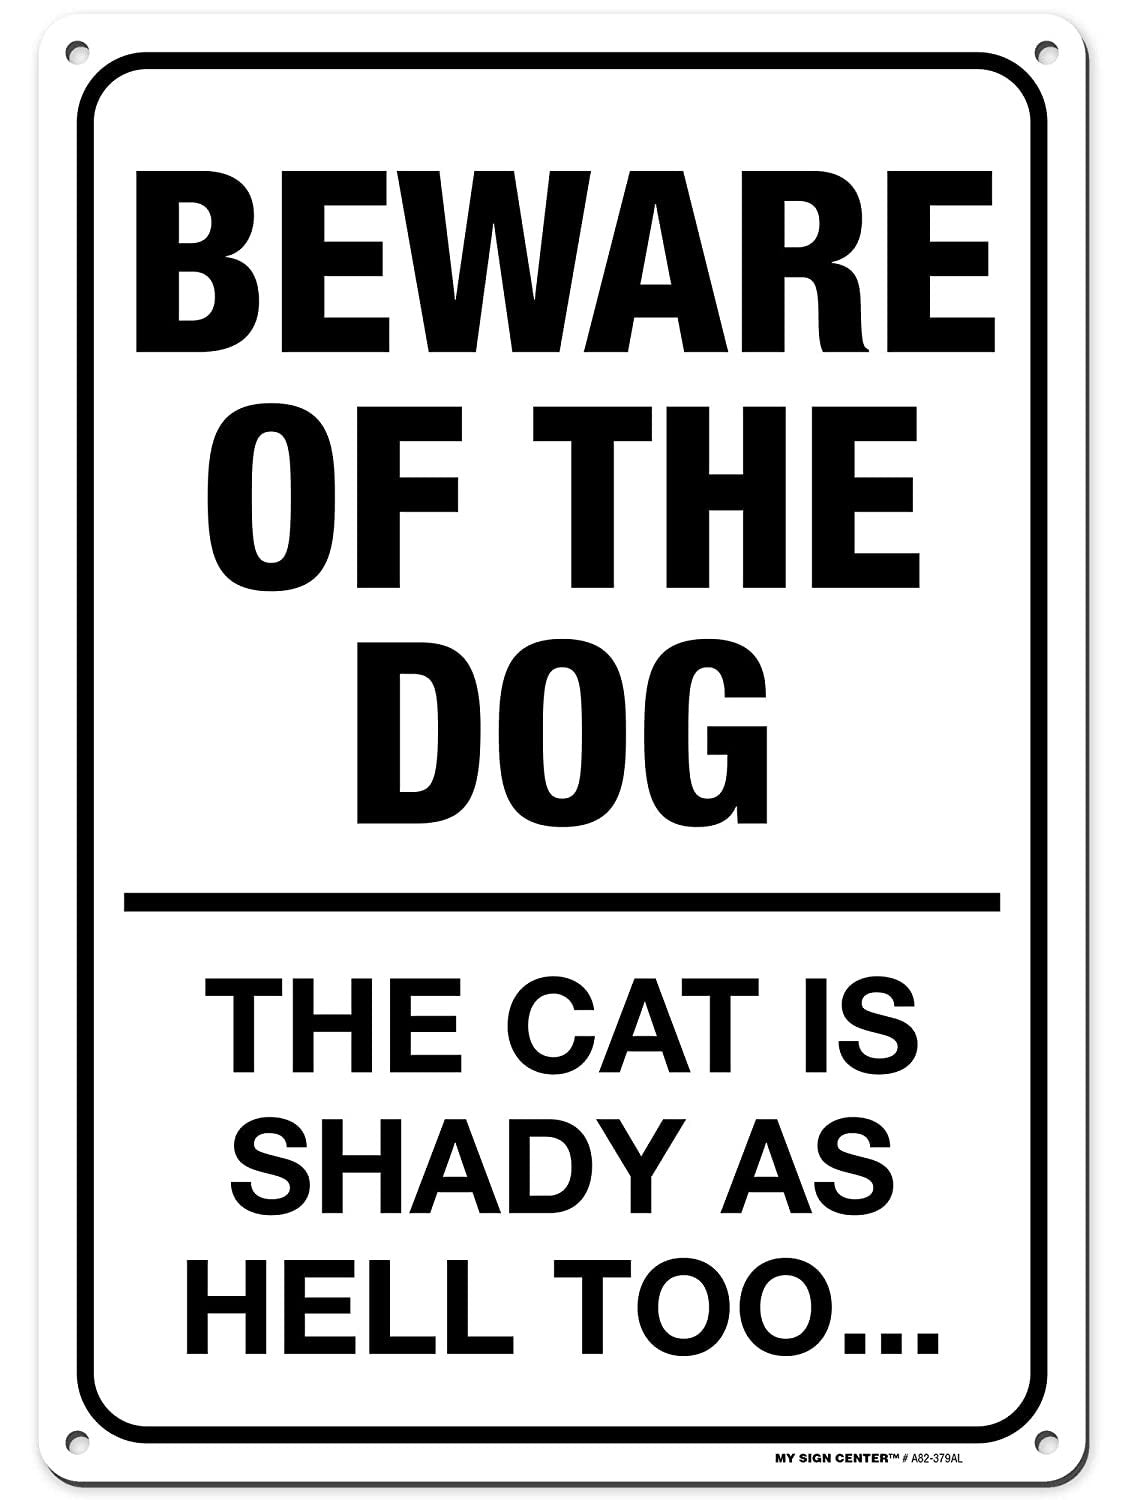 Funny Beware of Dog Sign and The Shady Cat Sign